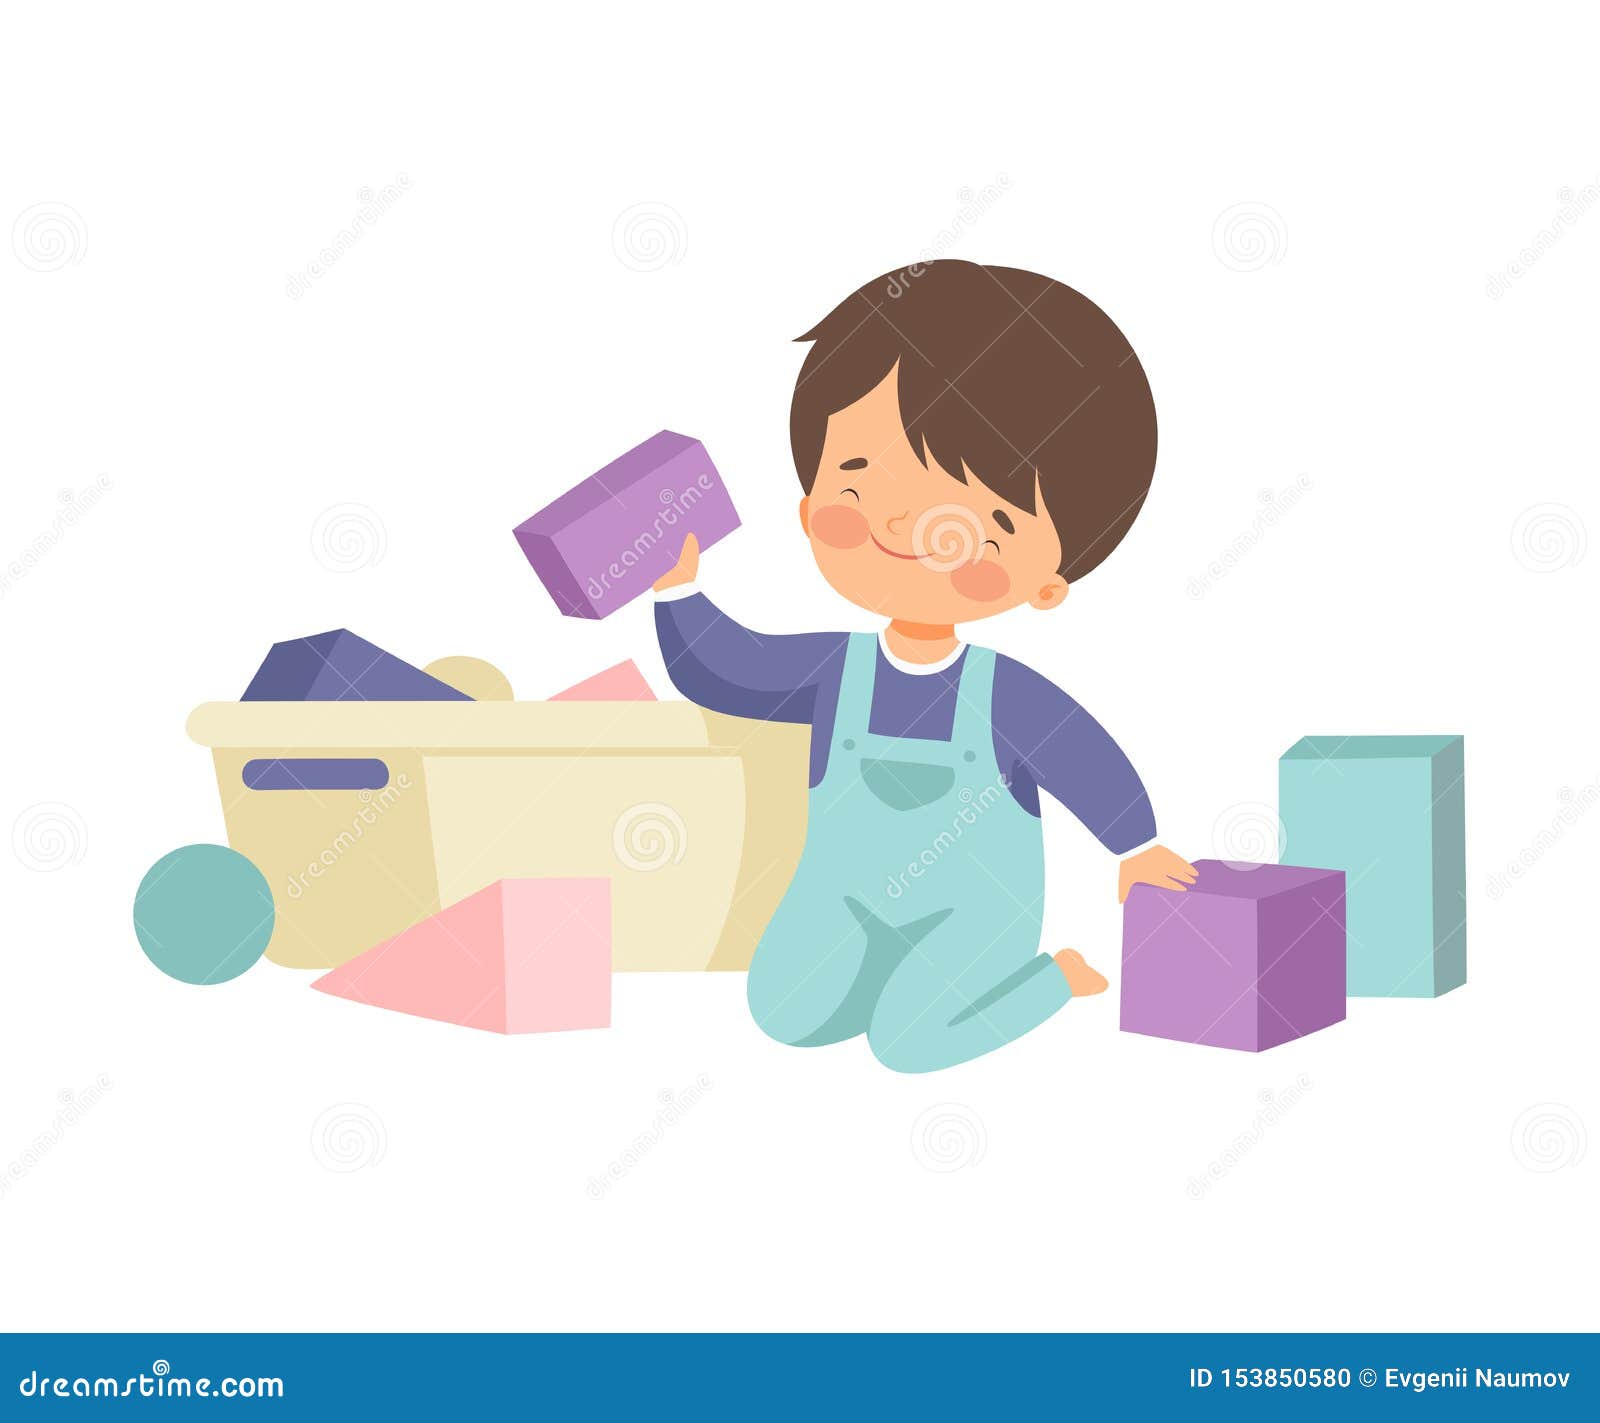 cute boy sitting on floor and cleaning up his toys, kid doing housework chores at home  